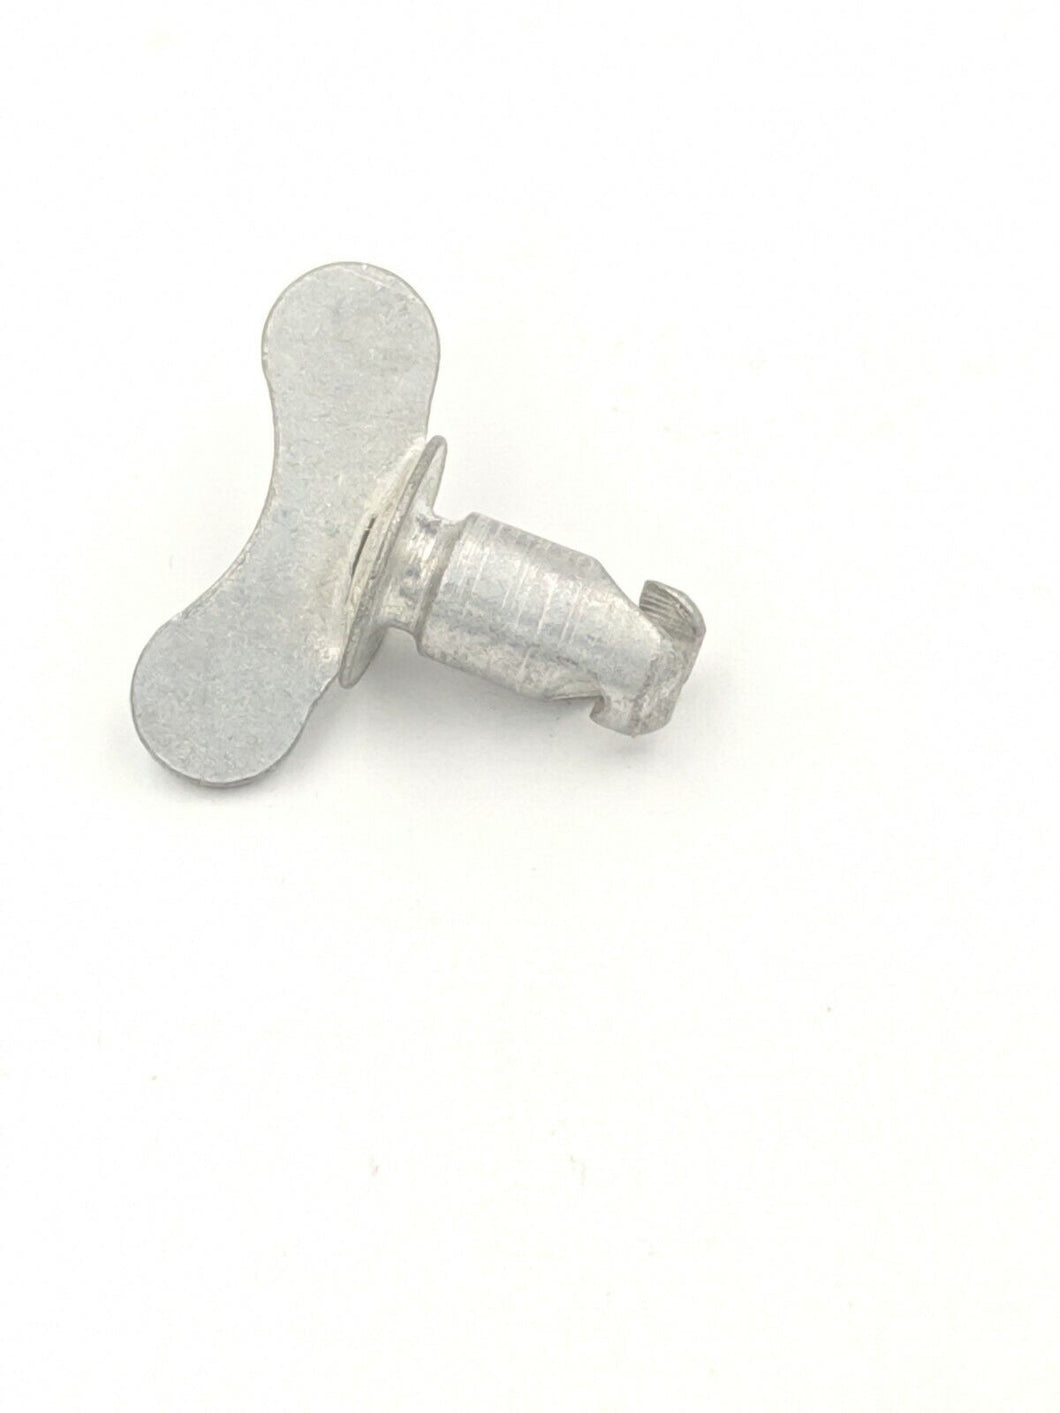 AW4-40 Aircraft Fastener  (QTY of 8)